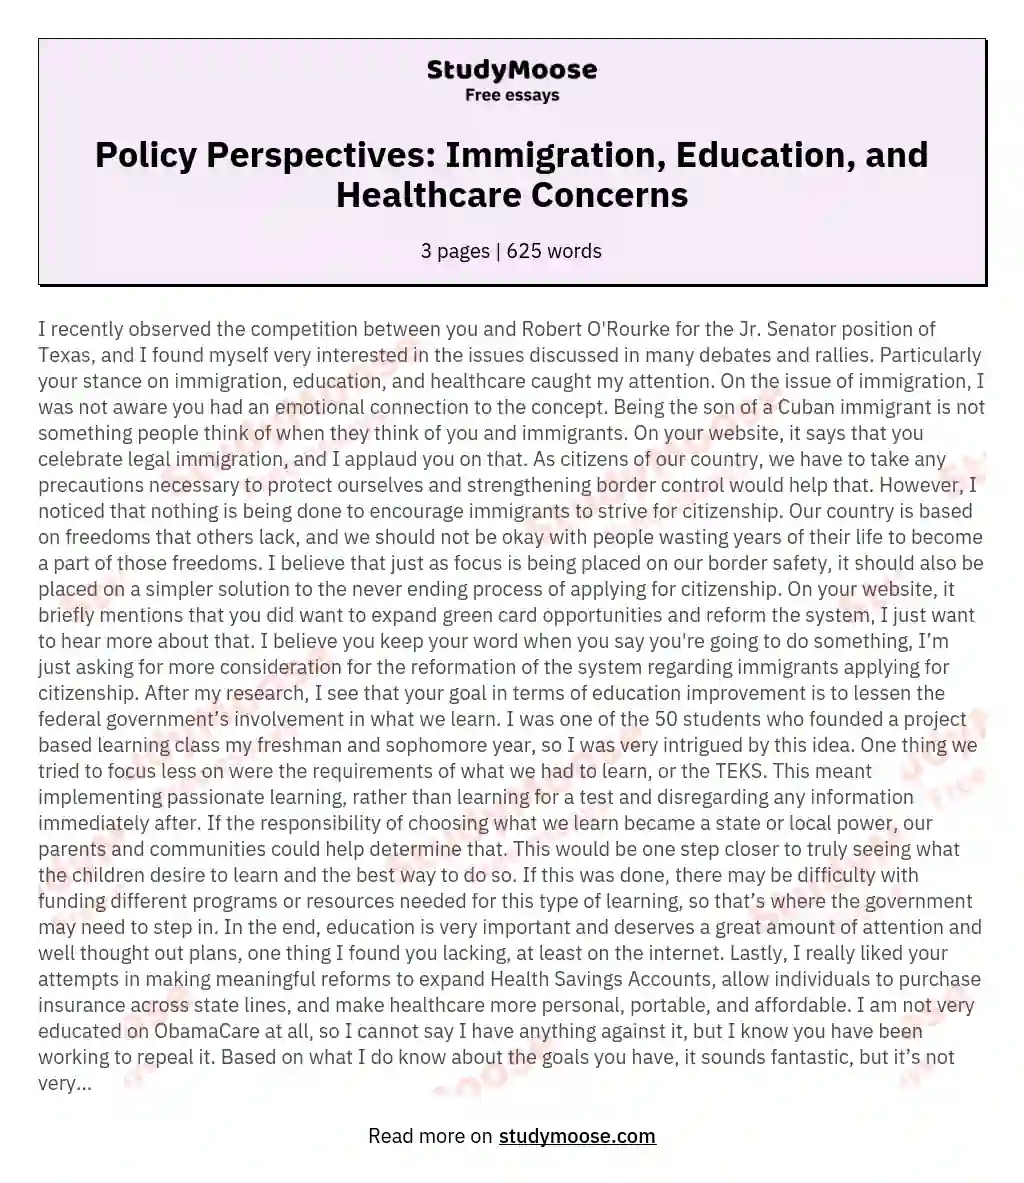 Policy Perspectives: Immigration, Education, and Healthcare Concerns essay